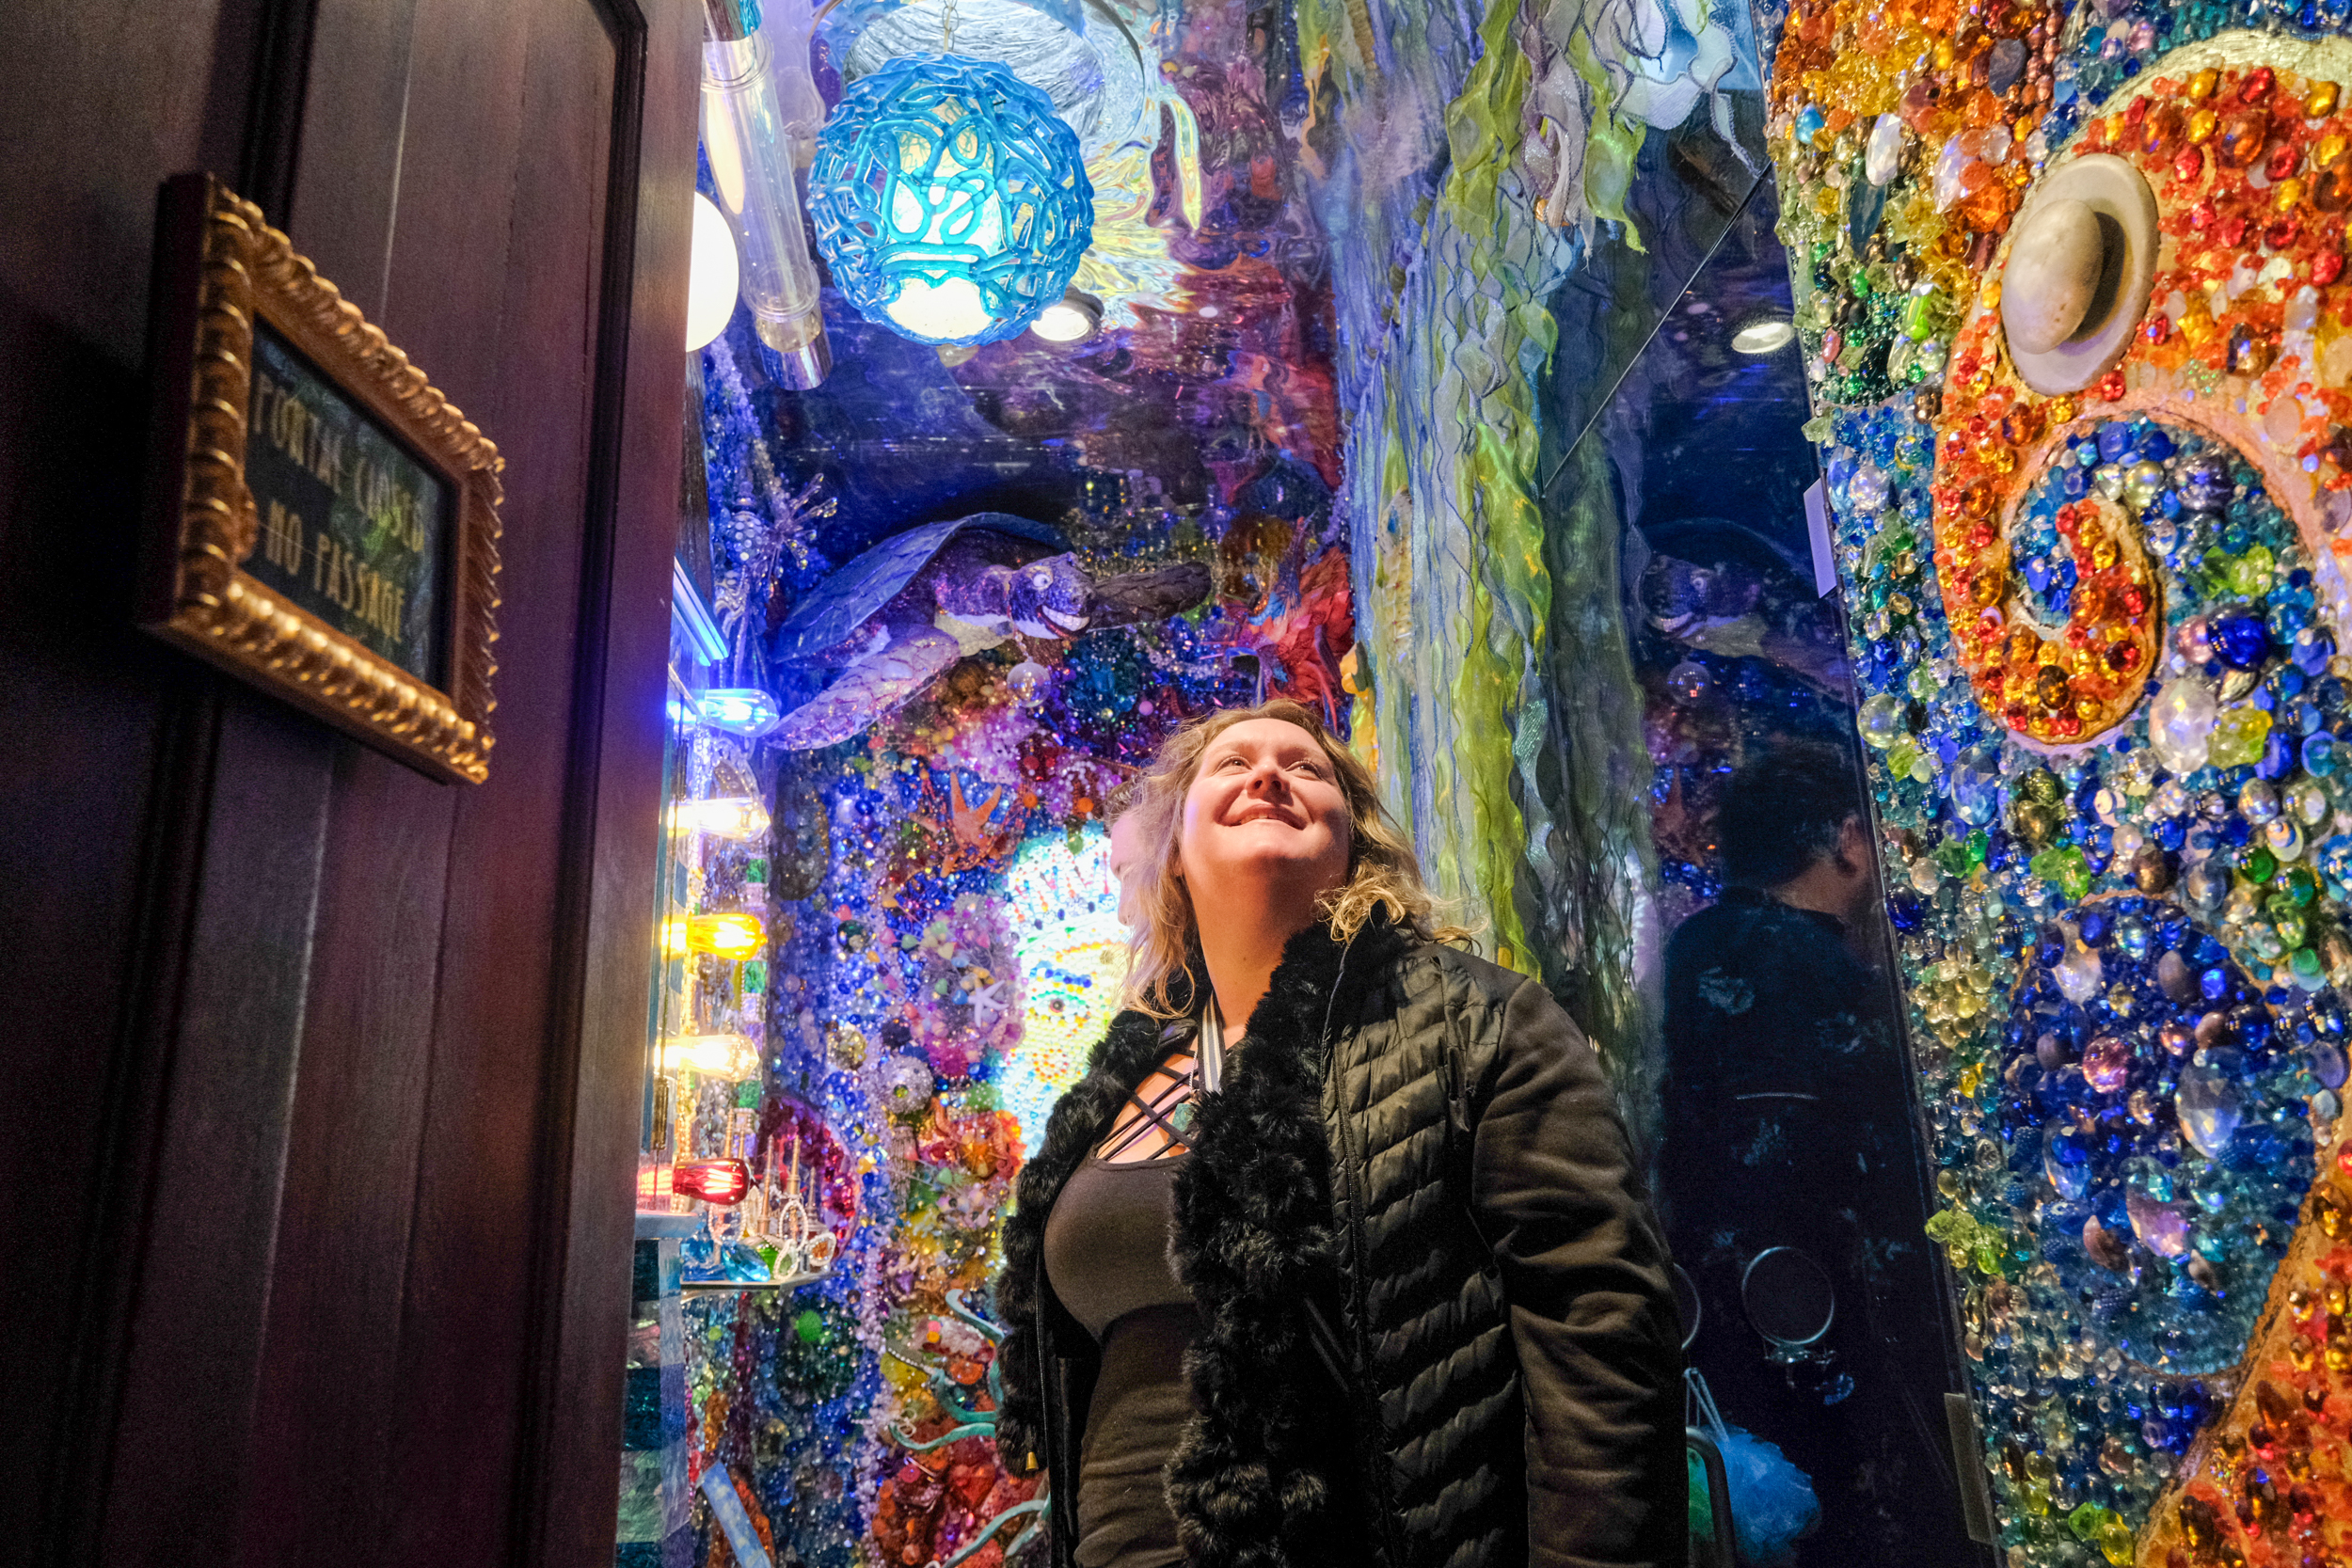 A woman looks up, smiling, in a vibrant, eclectic hallway adorned with colorful glass and lights.